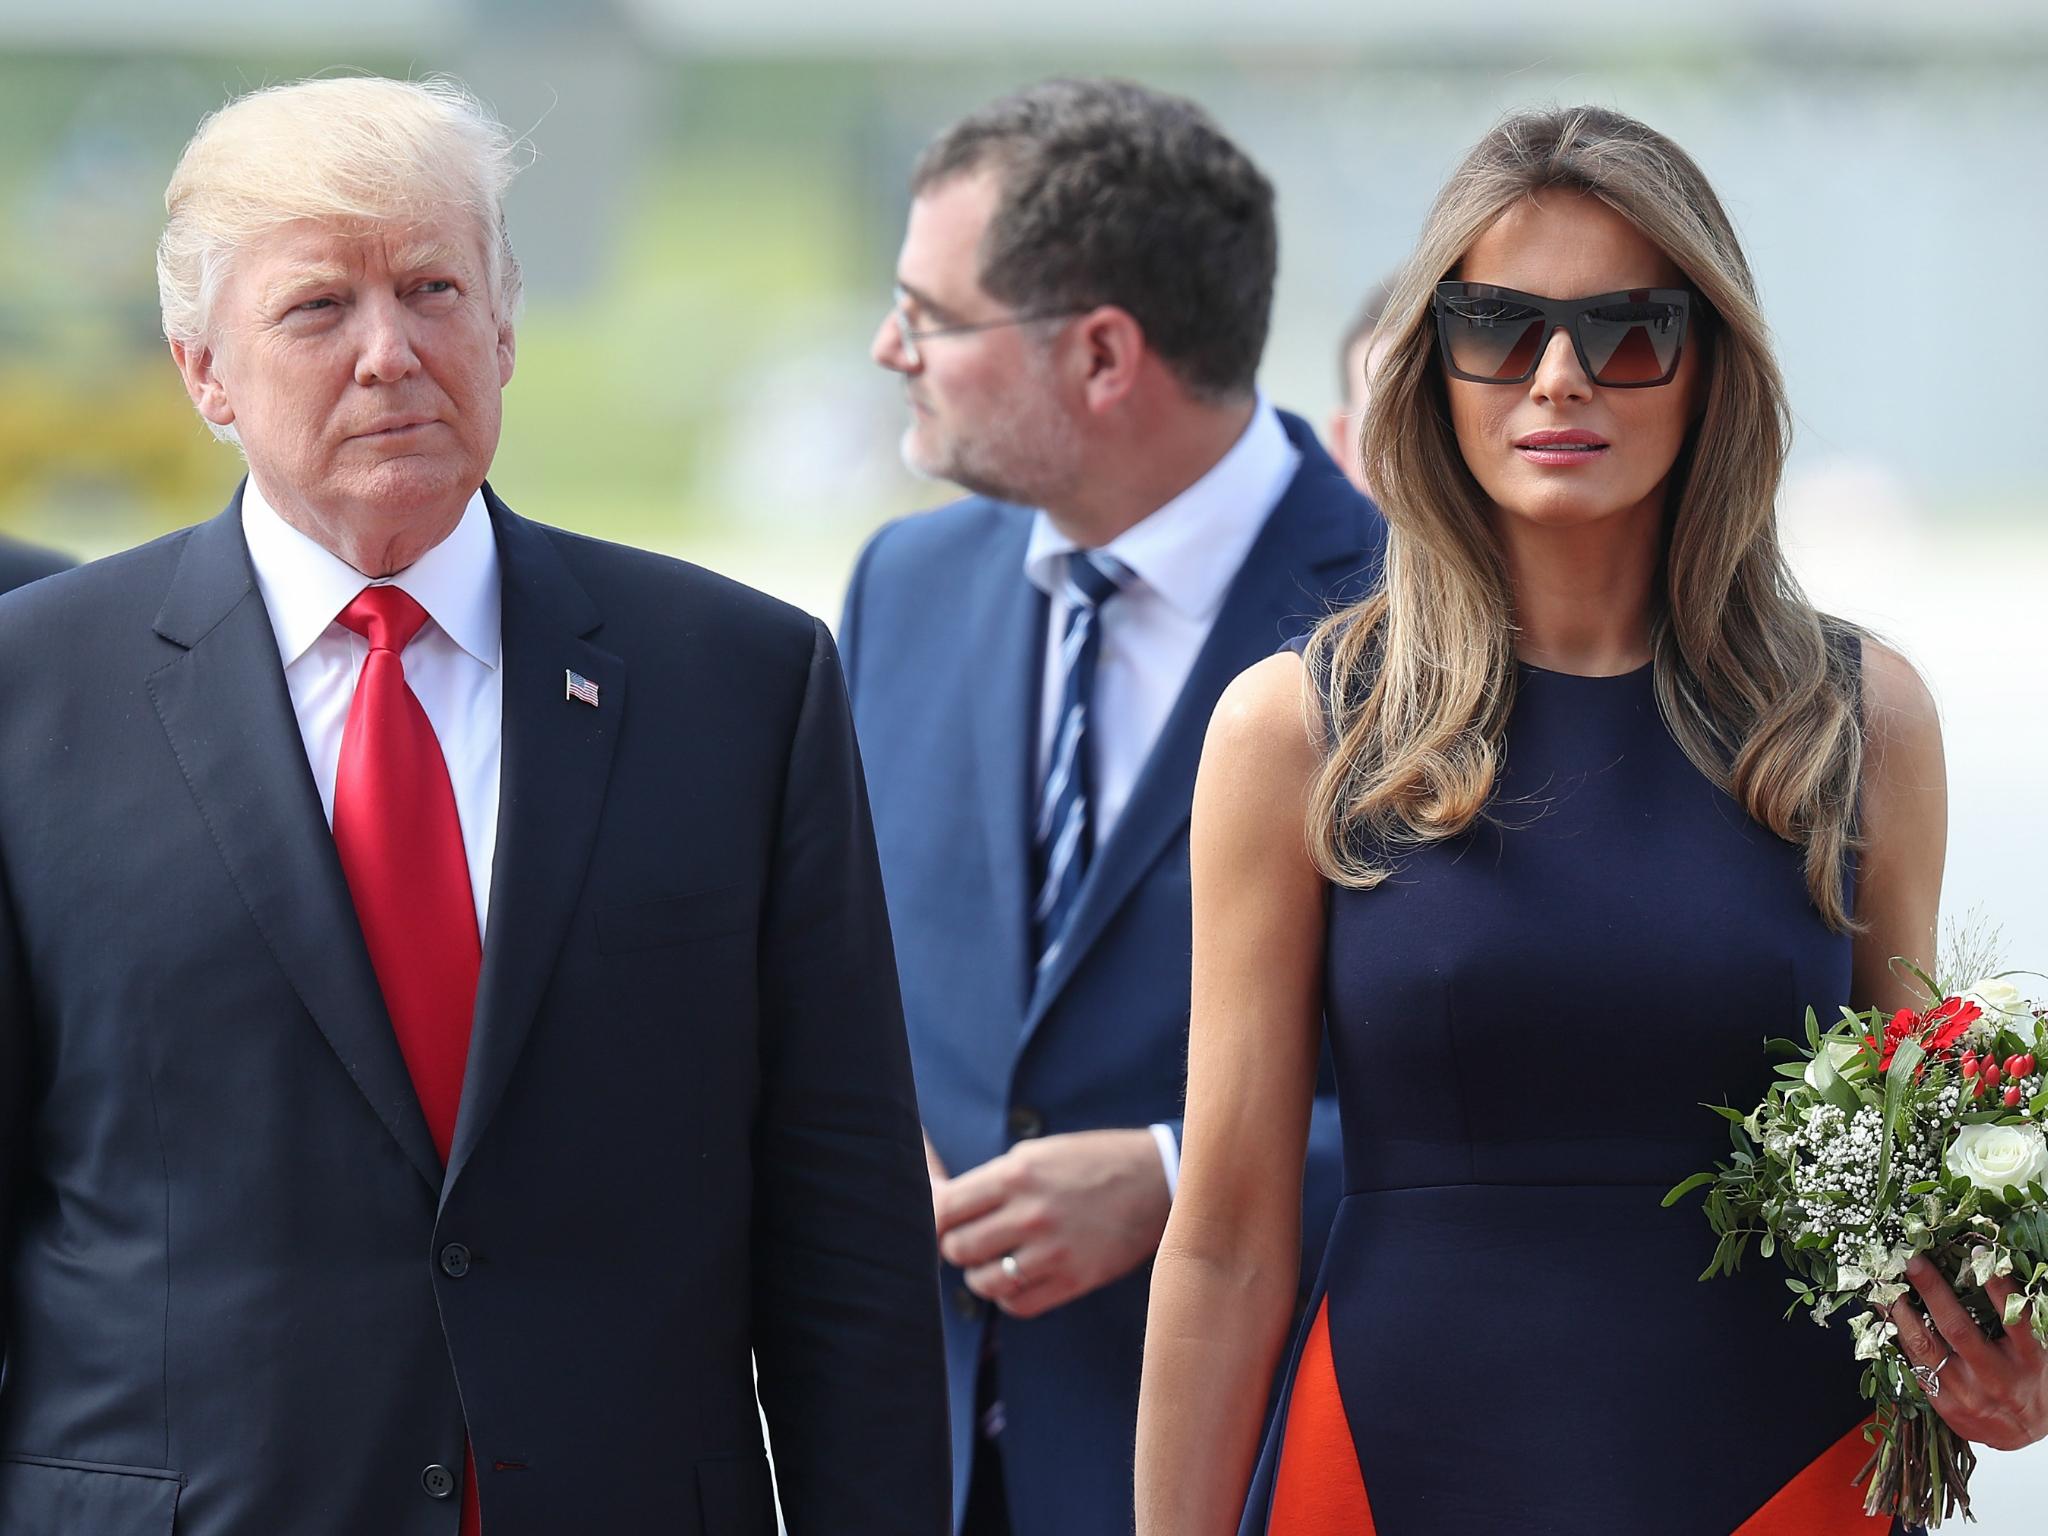 Donald Trump may be 'remarkably unprepared' as he arrives in Hamburg, Germany for the G20 summit with First Lady Melania Trump